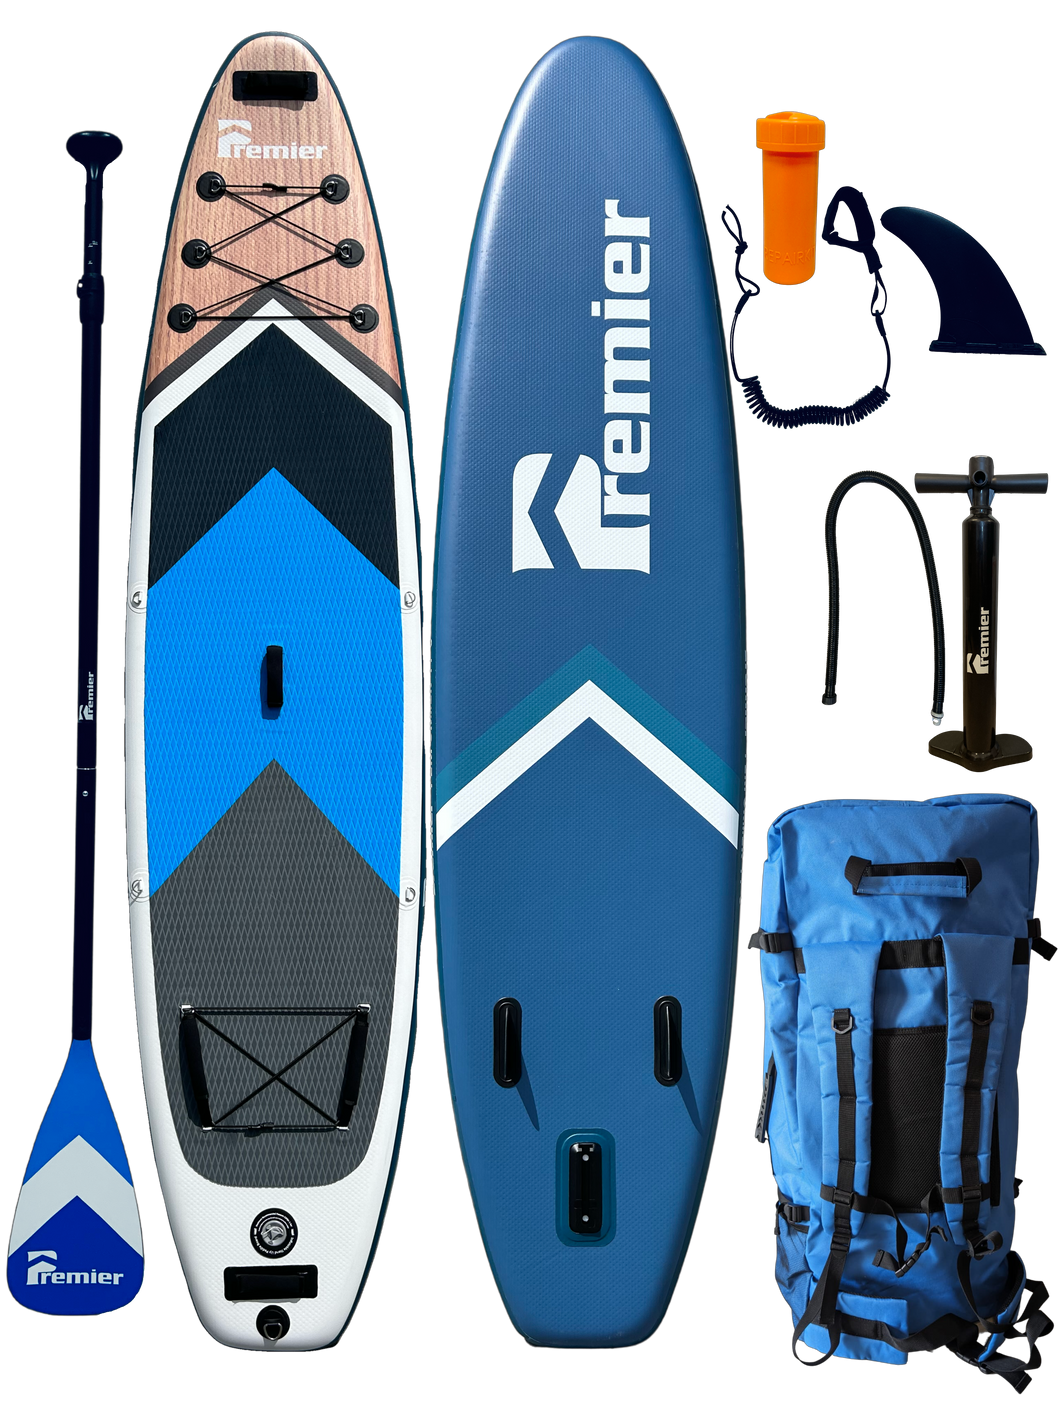 Premier Performer 11'6 Paddle Board with Premium Accessory Kit